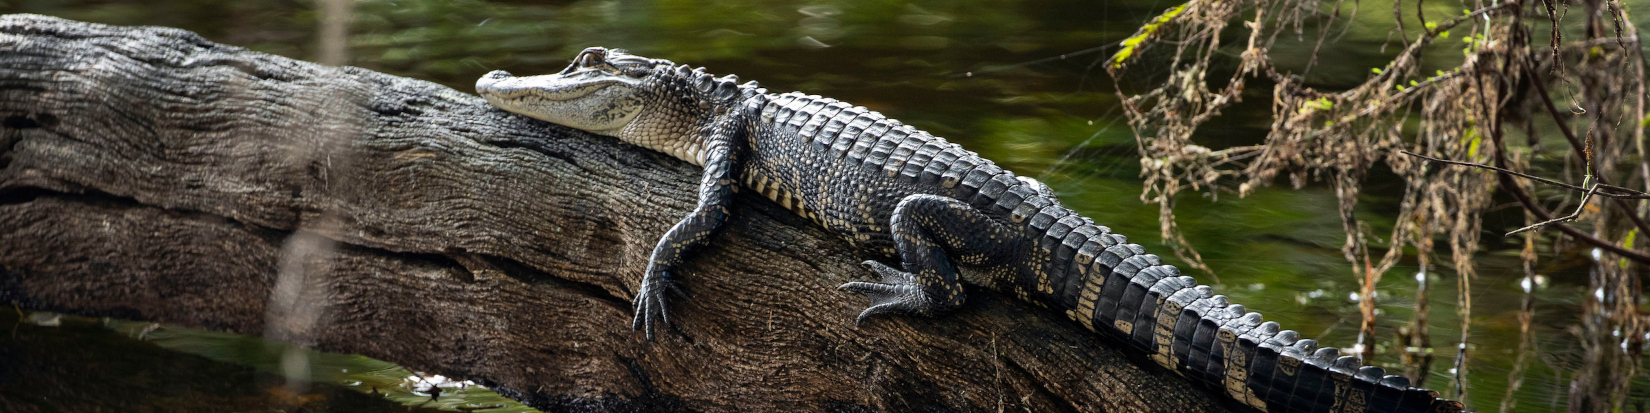 An image of a gator resting on a log.